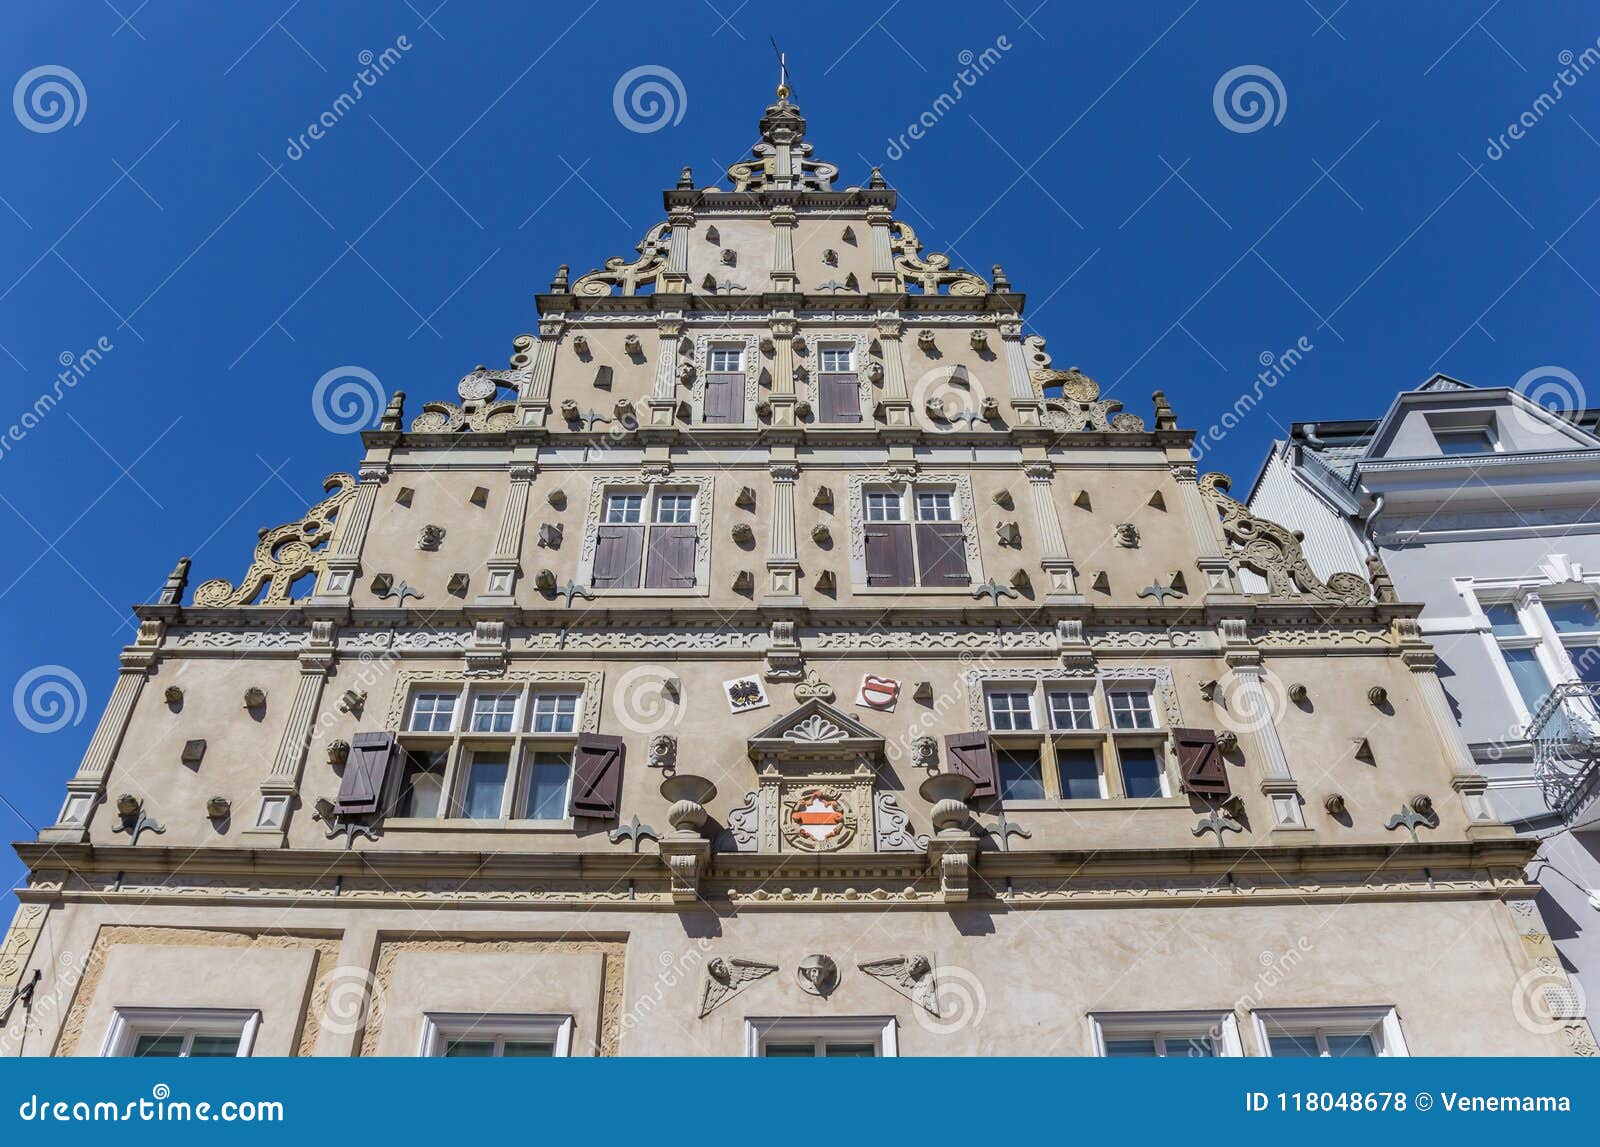 decorated facade of a historic building in herford